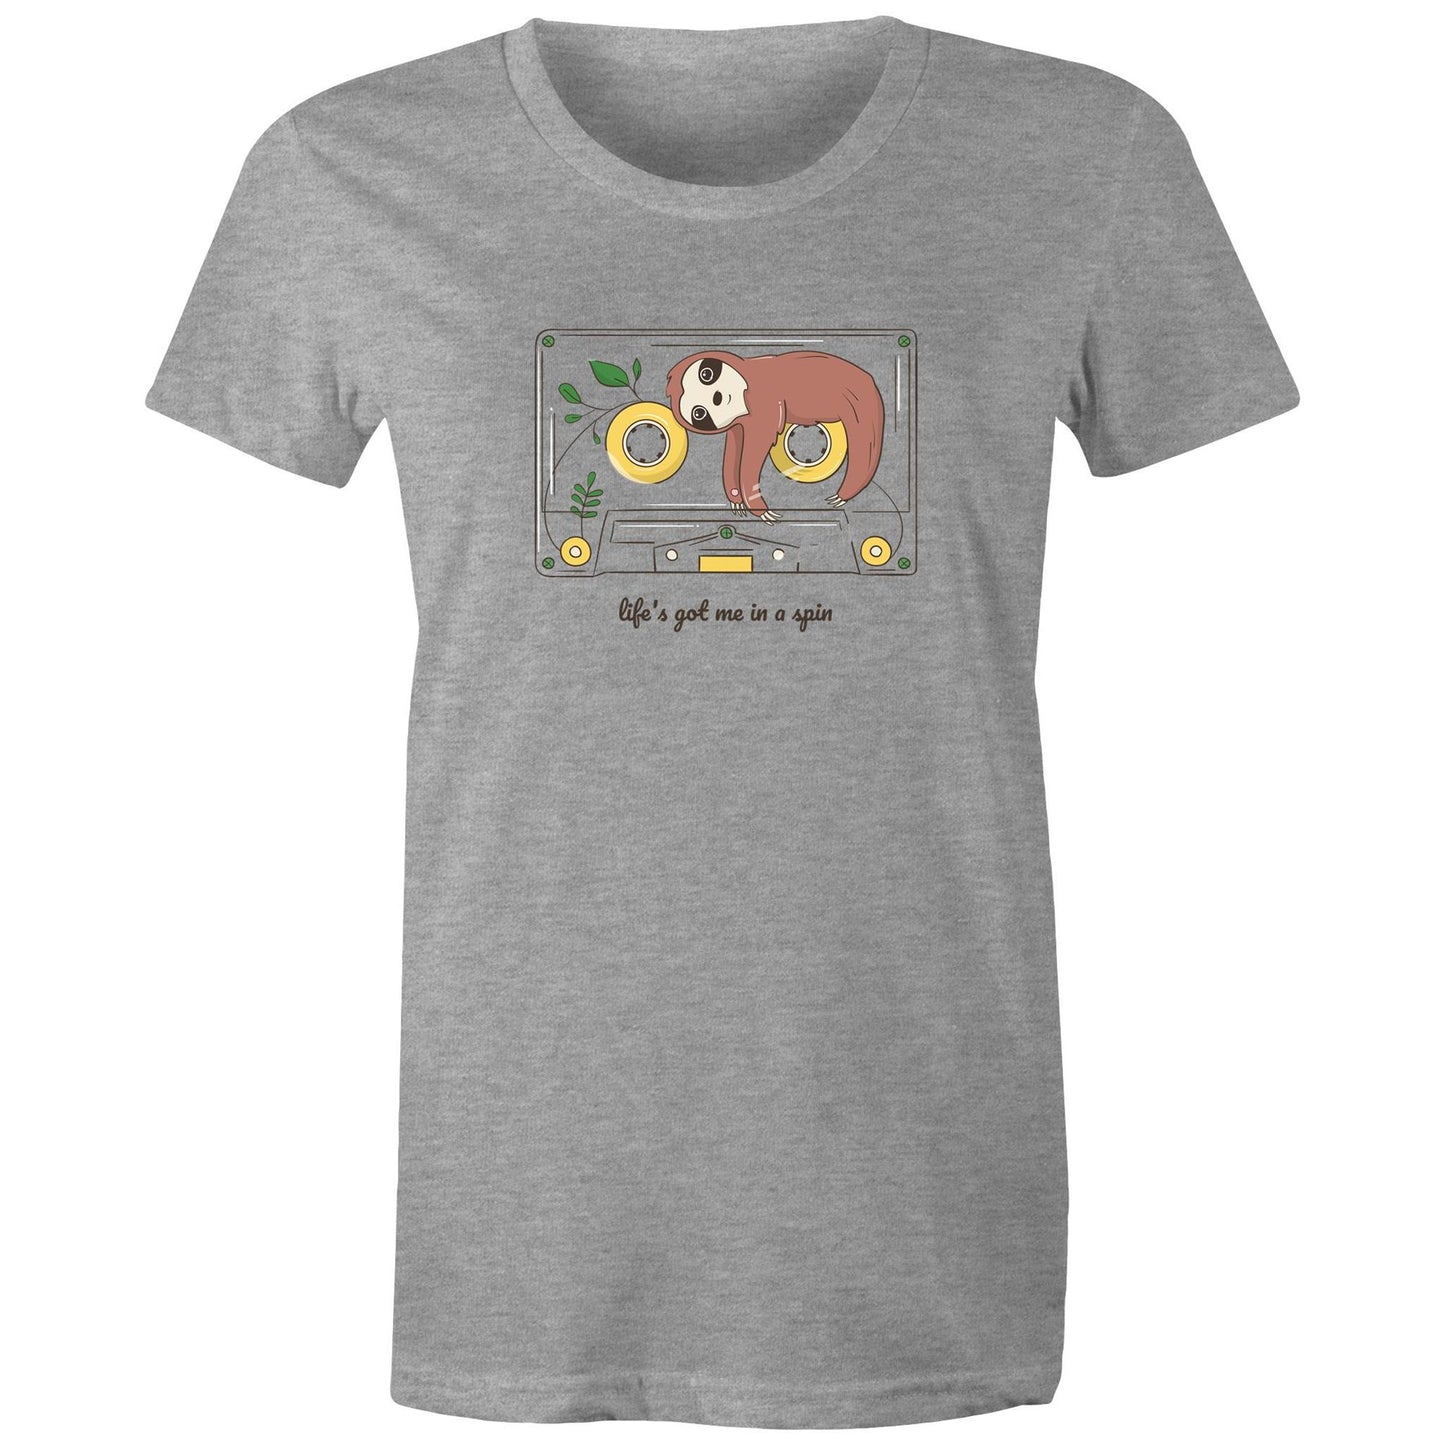 Cassette, Life's Got Me In A Spin - Womens T-shirt Grey Marle Womens T-shirt animal Music Retro